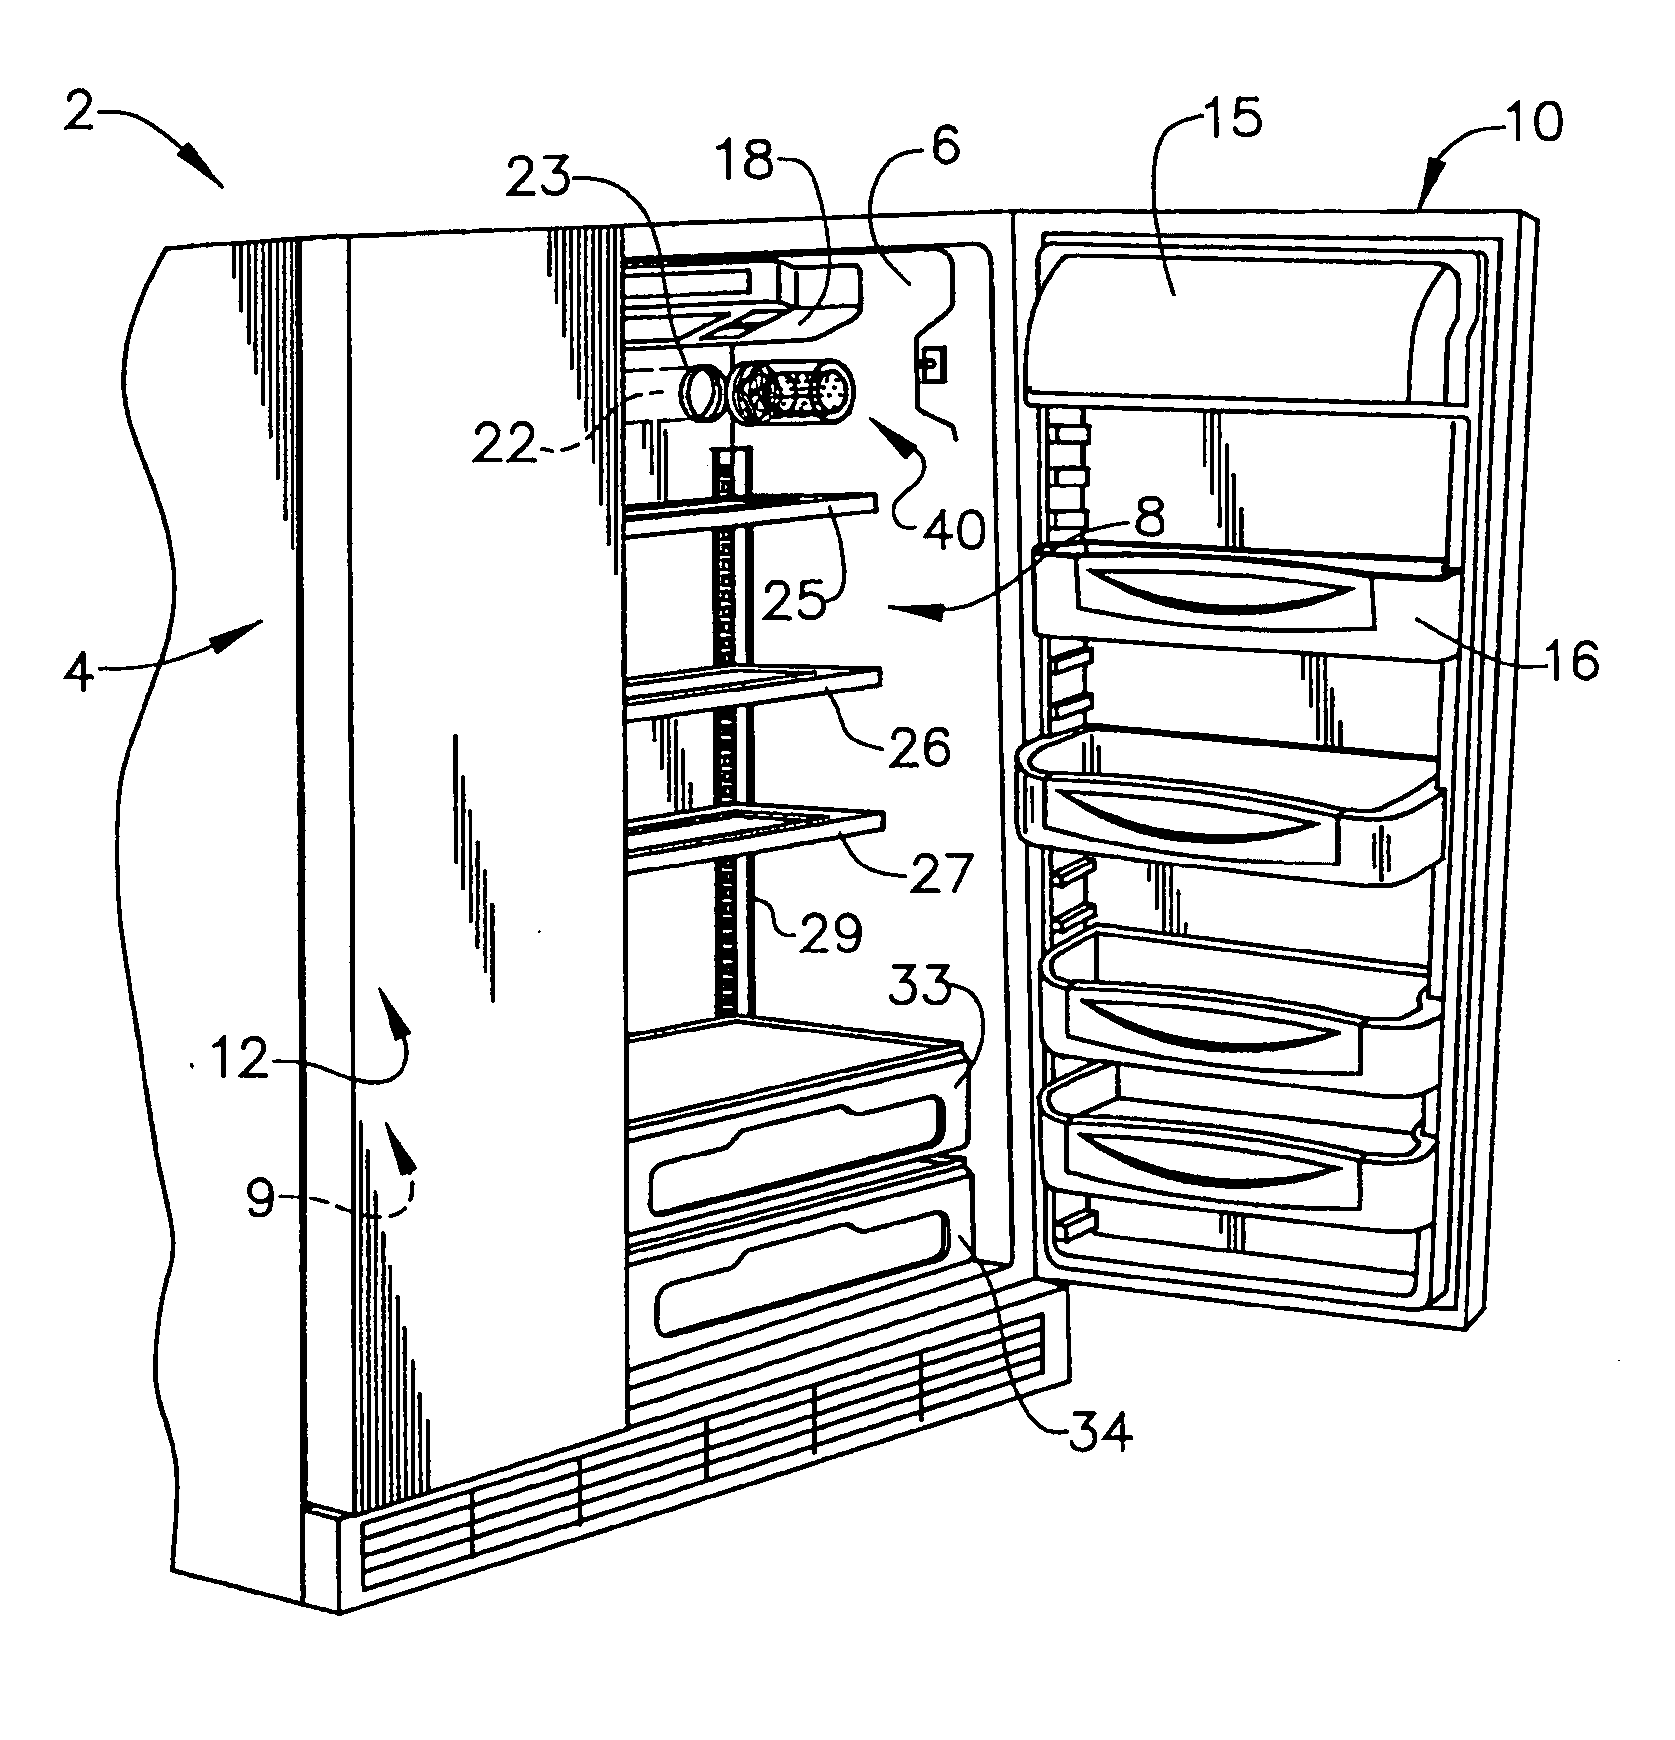 Device for rapidly chilling articles in a refrigerator